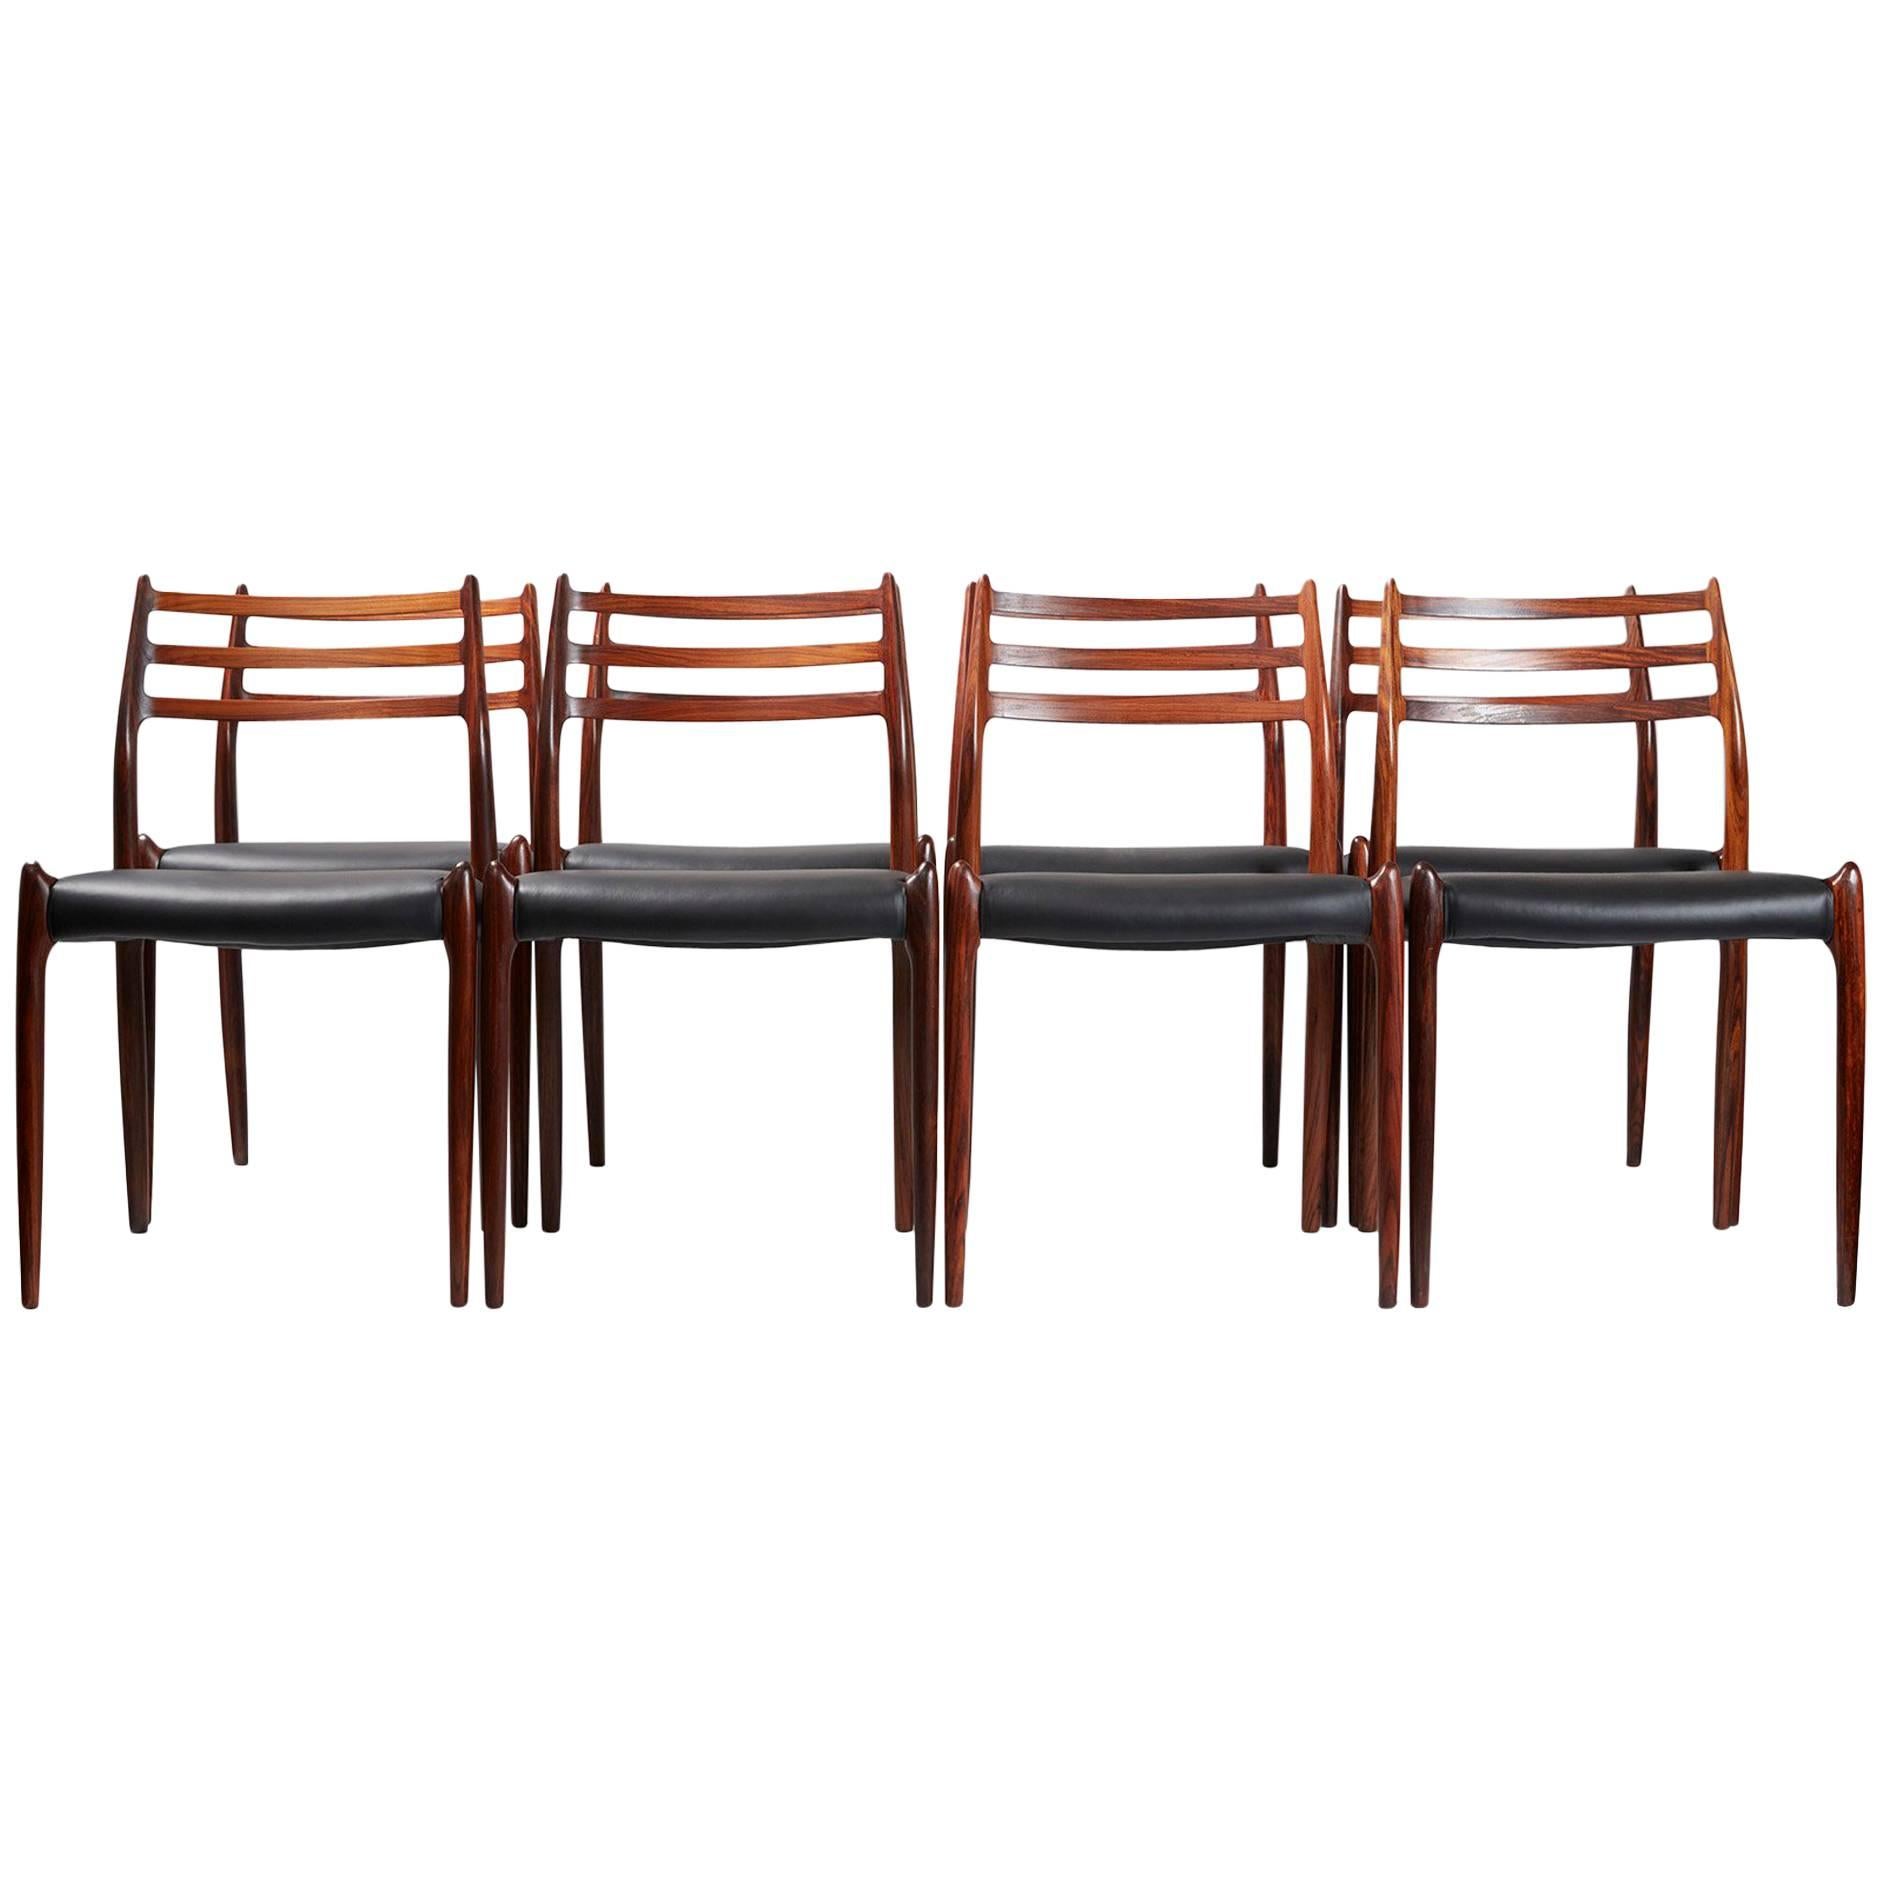 Niels O. Moller

Model 78 dining chairs, 1962

Set of eight rosewood dining chairs designed by Niels O. Moller for J.L. Moller Mobelfabrik, Denmark, 1962. Rare early productions with more slender frames. Seats reupholstered with new black